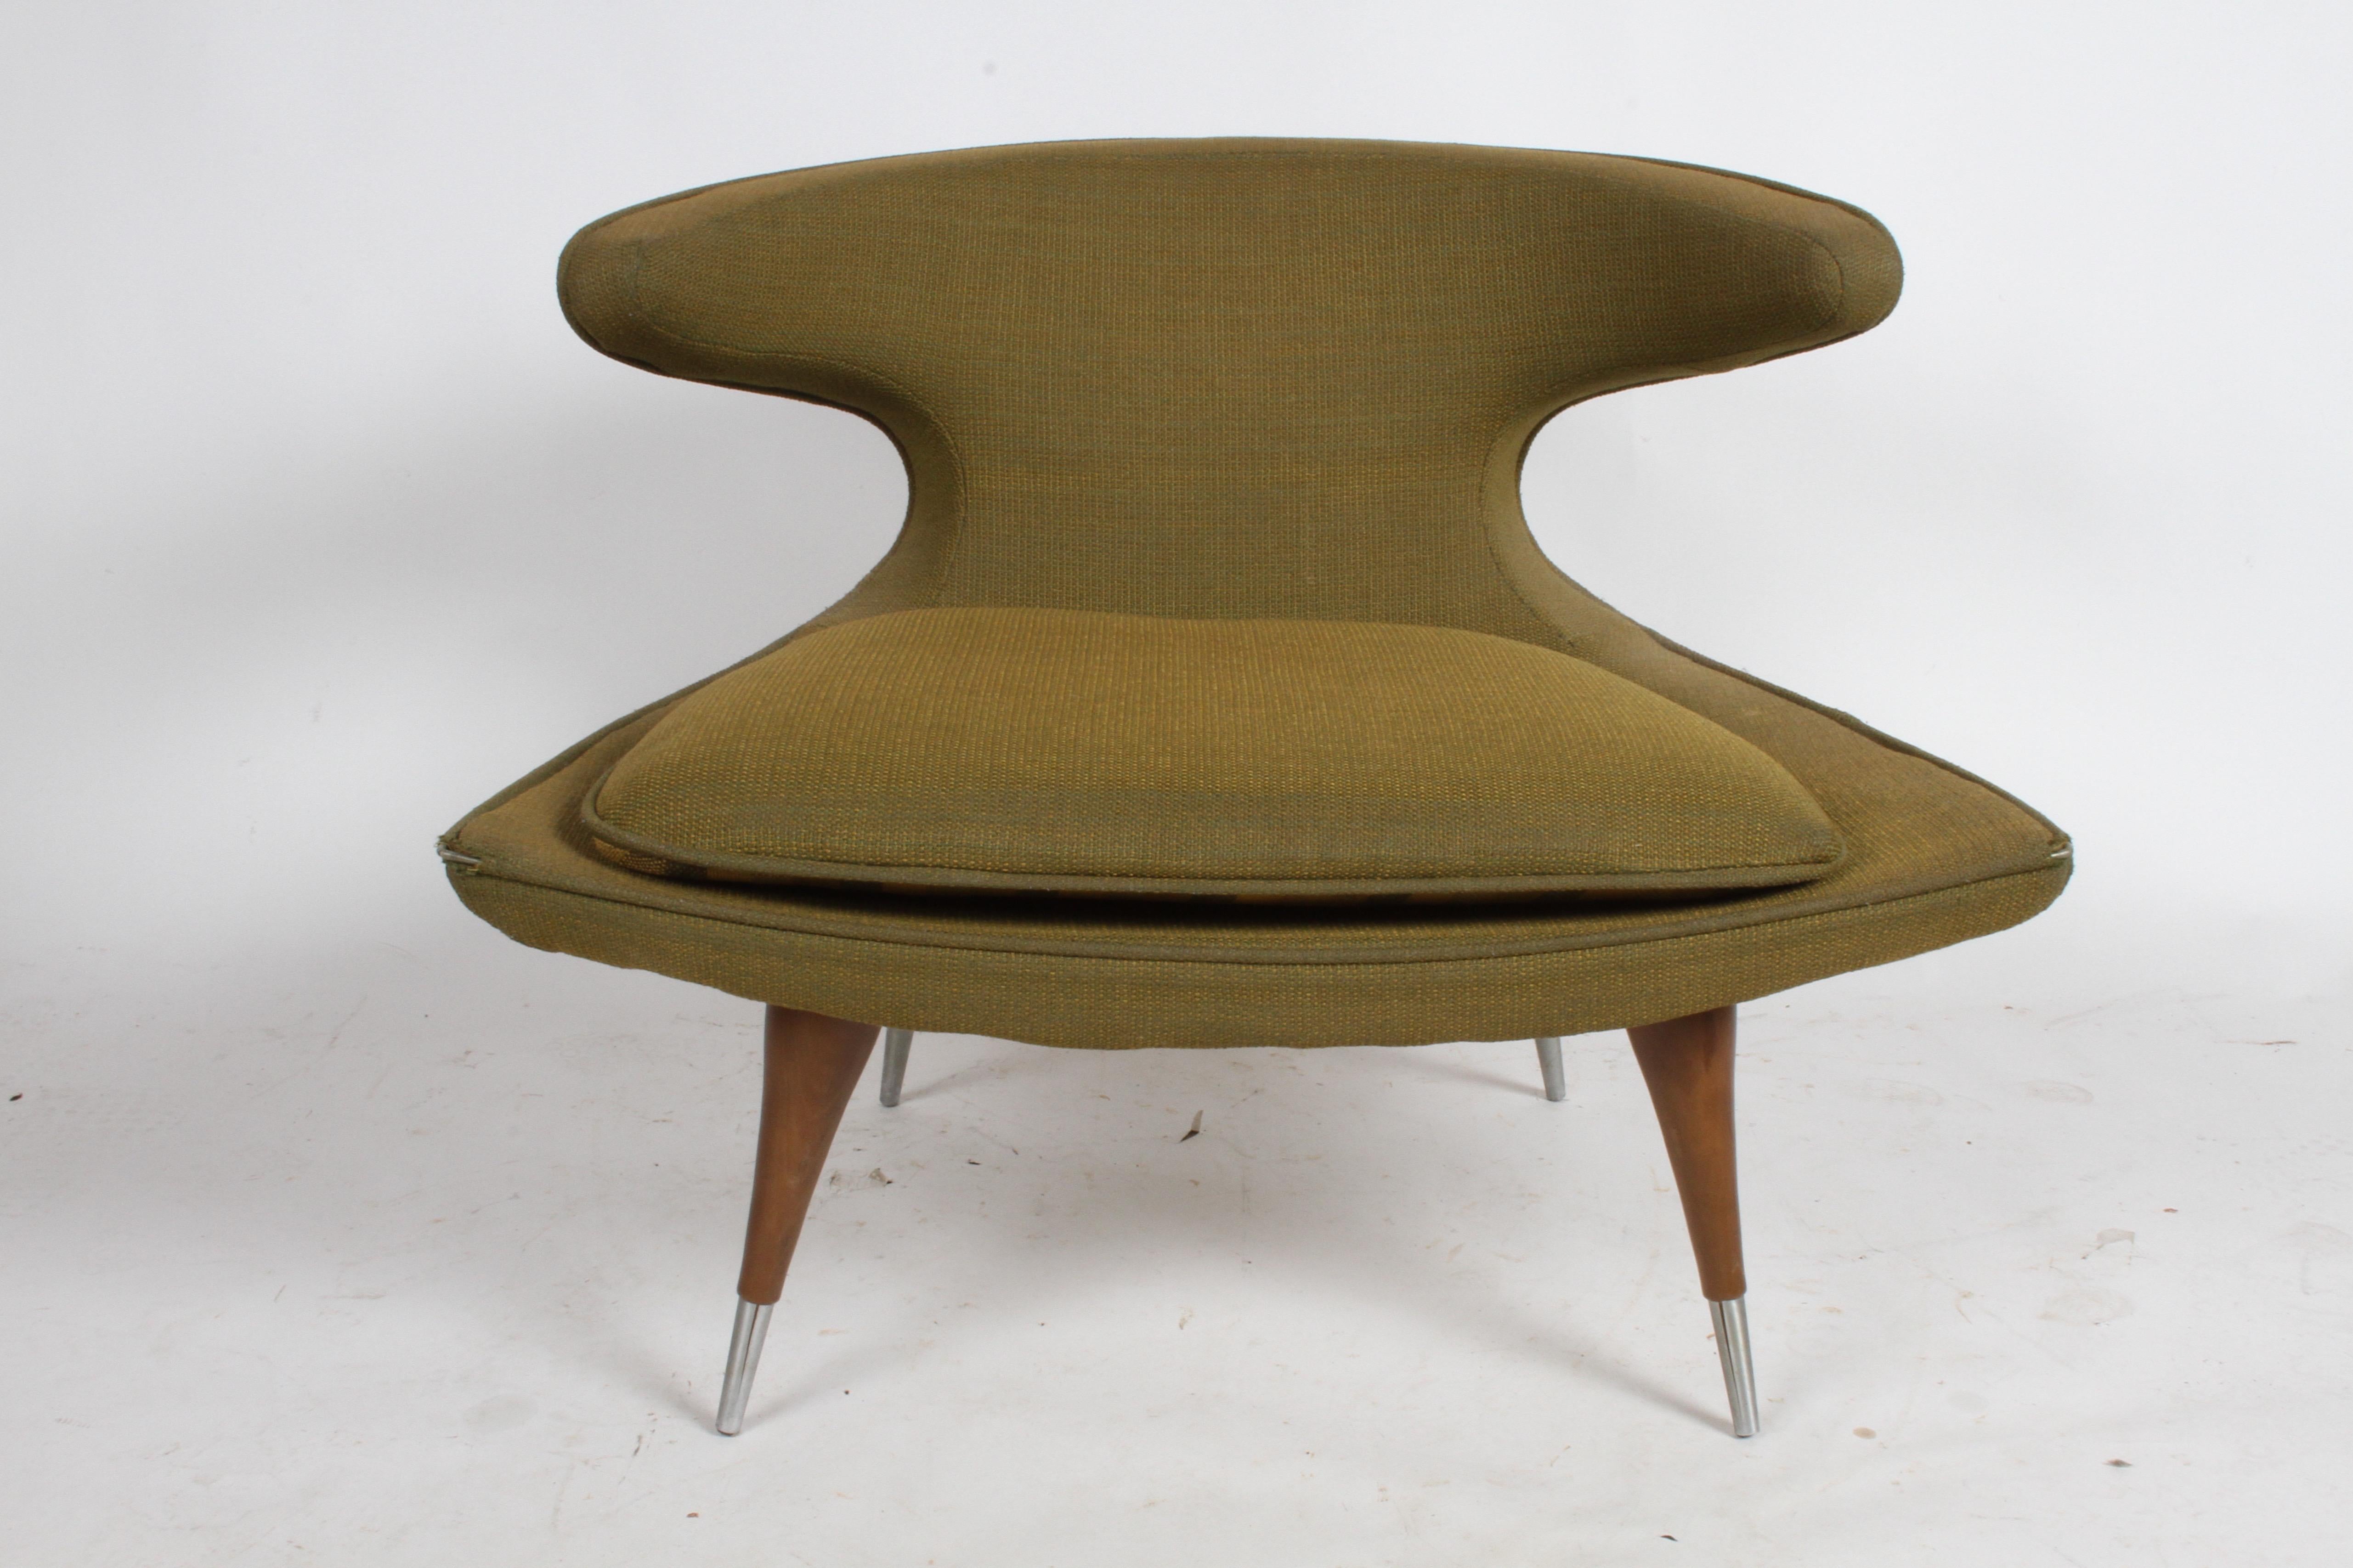 The horn chair, one of the best designs by Karpen of California, a very iconic midcentury form. This lounge chair is all original, fabric is in need of updating, structurally fine. Steel sabots have some splitting. Retains label. A Rare and hard to